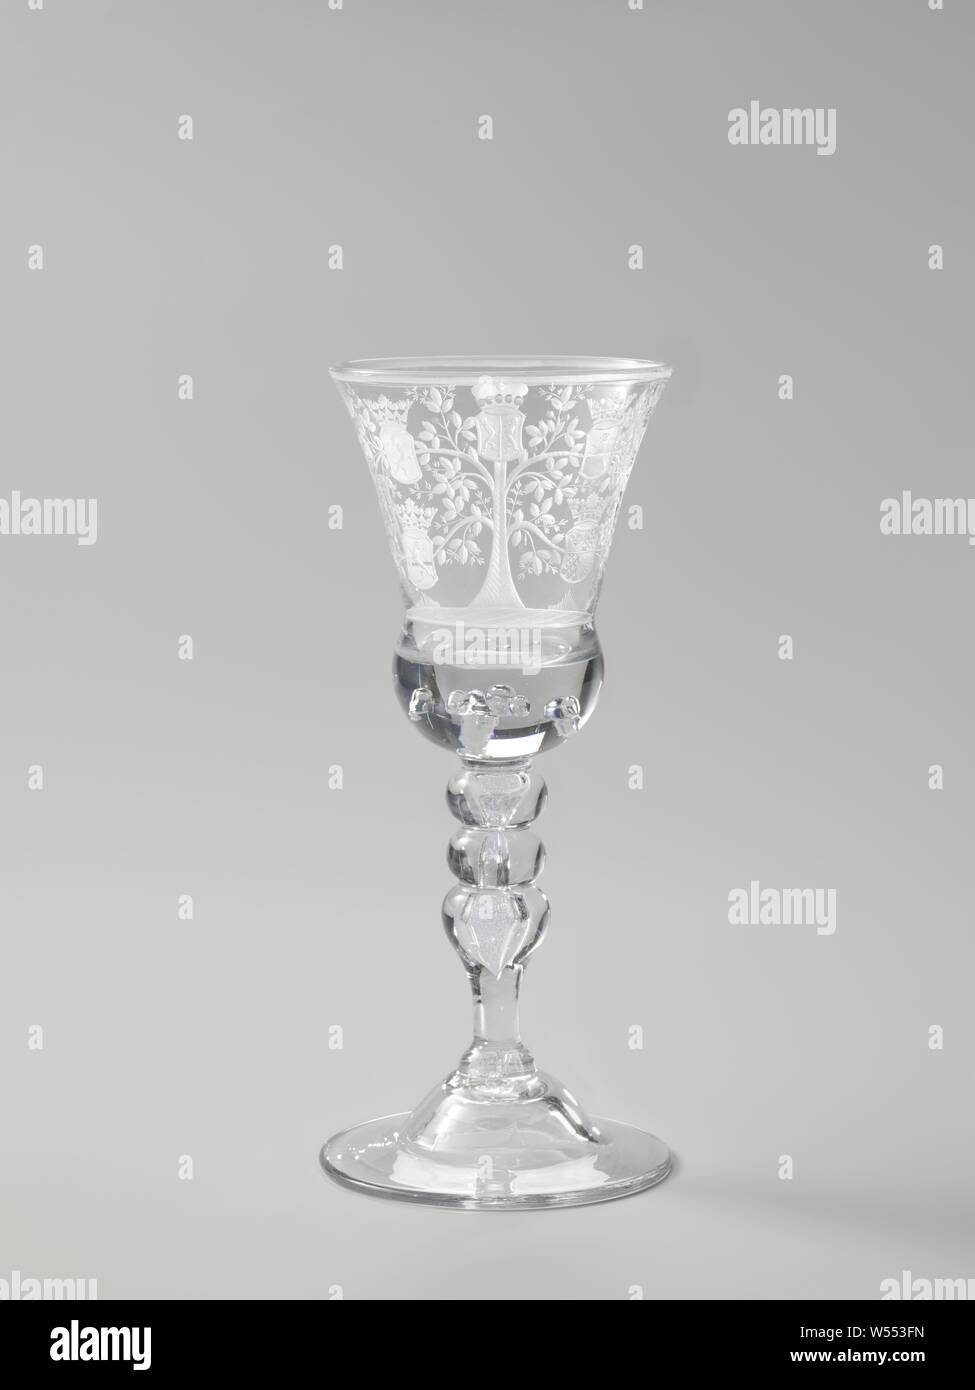 Wine glass with a tree with the seven arms of the Republic of the Seven United Netherlands Cup with the arms of the Seven Provinces, Bell shaped arched foot. Baluster stem with two knots and an elongated air bubble. Bell-shaped chalice with massive, rounded base with air bubbles. On the chalice the weapons of the Seven Provinces, coat of arms (as symbol of the state, etc.), Seven provinces, anonymous, c. 1725 - c. 1750, glass, glassblowing, h 23.3 cm × d 10.4 cm Stock Photo